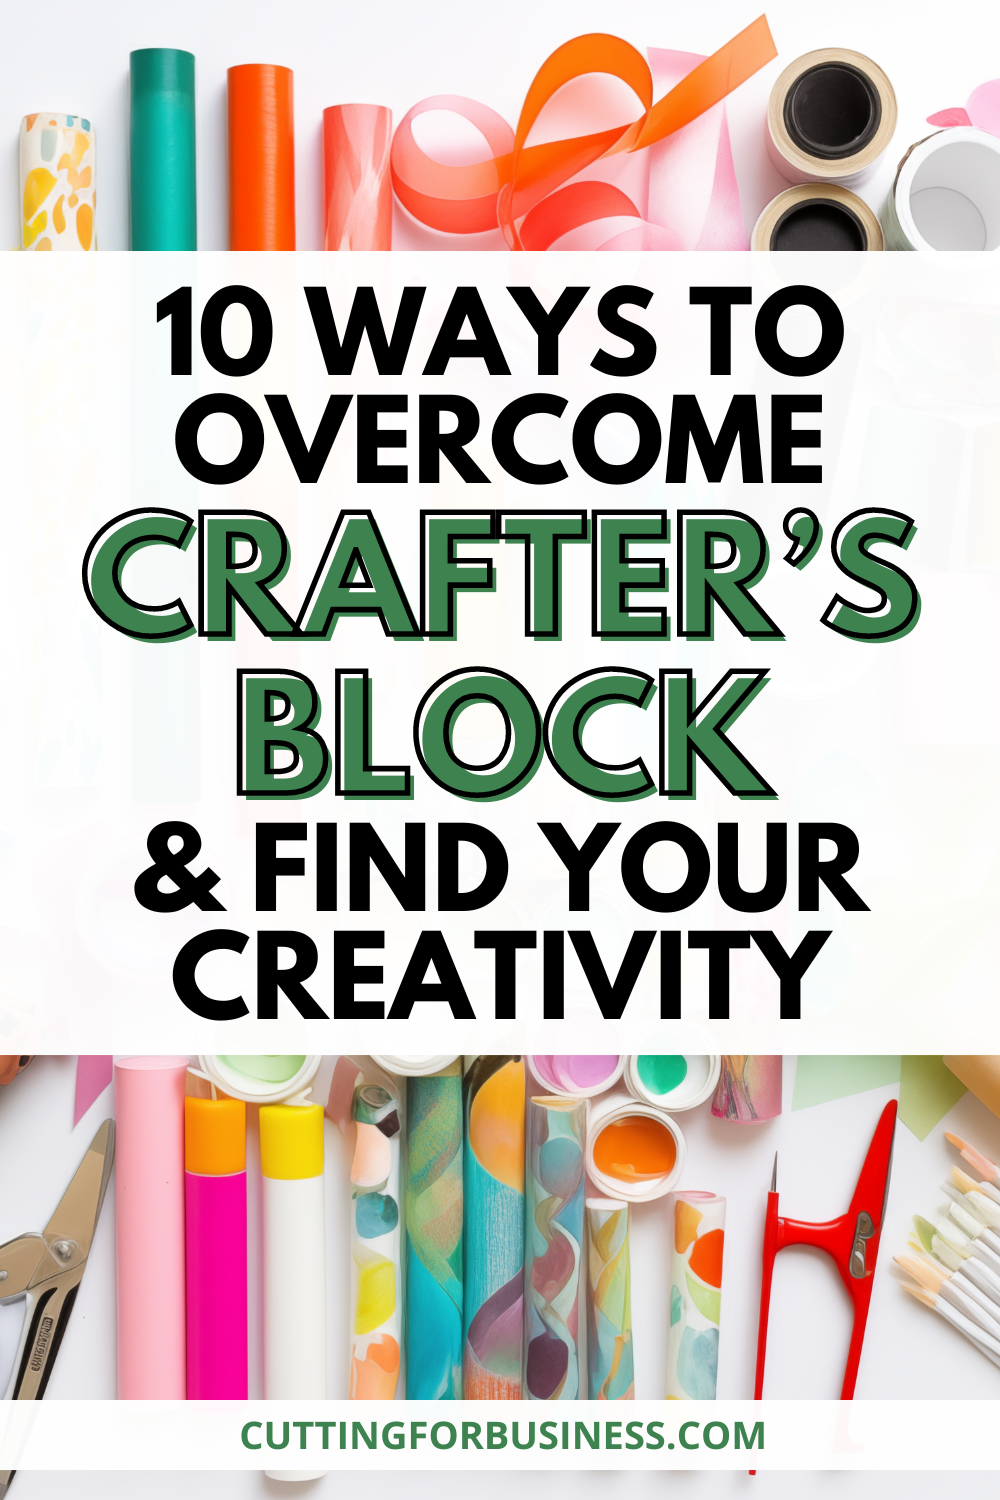 10 Ways to Overcome Crafter's Block & Find Your Creativity - cuttingforbusiness.com